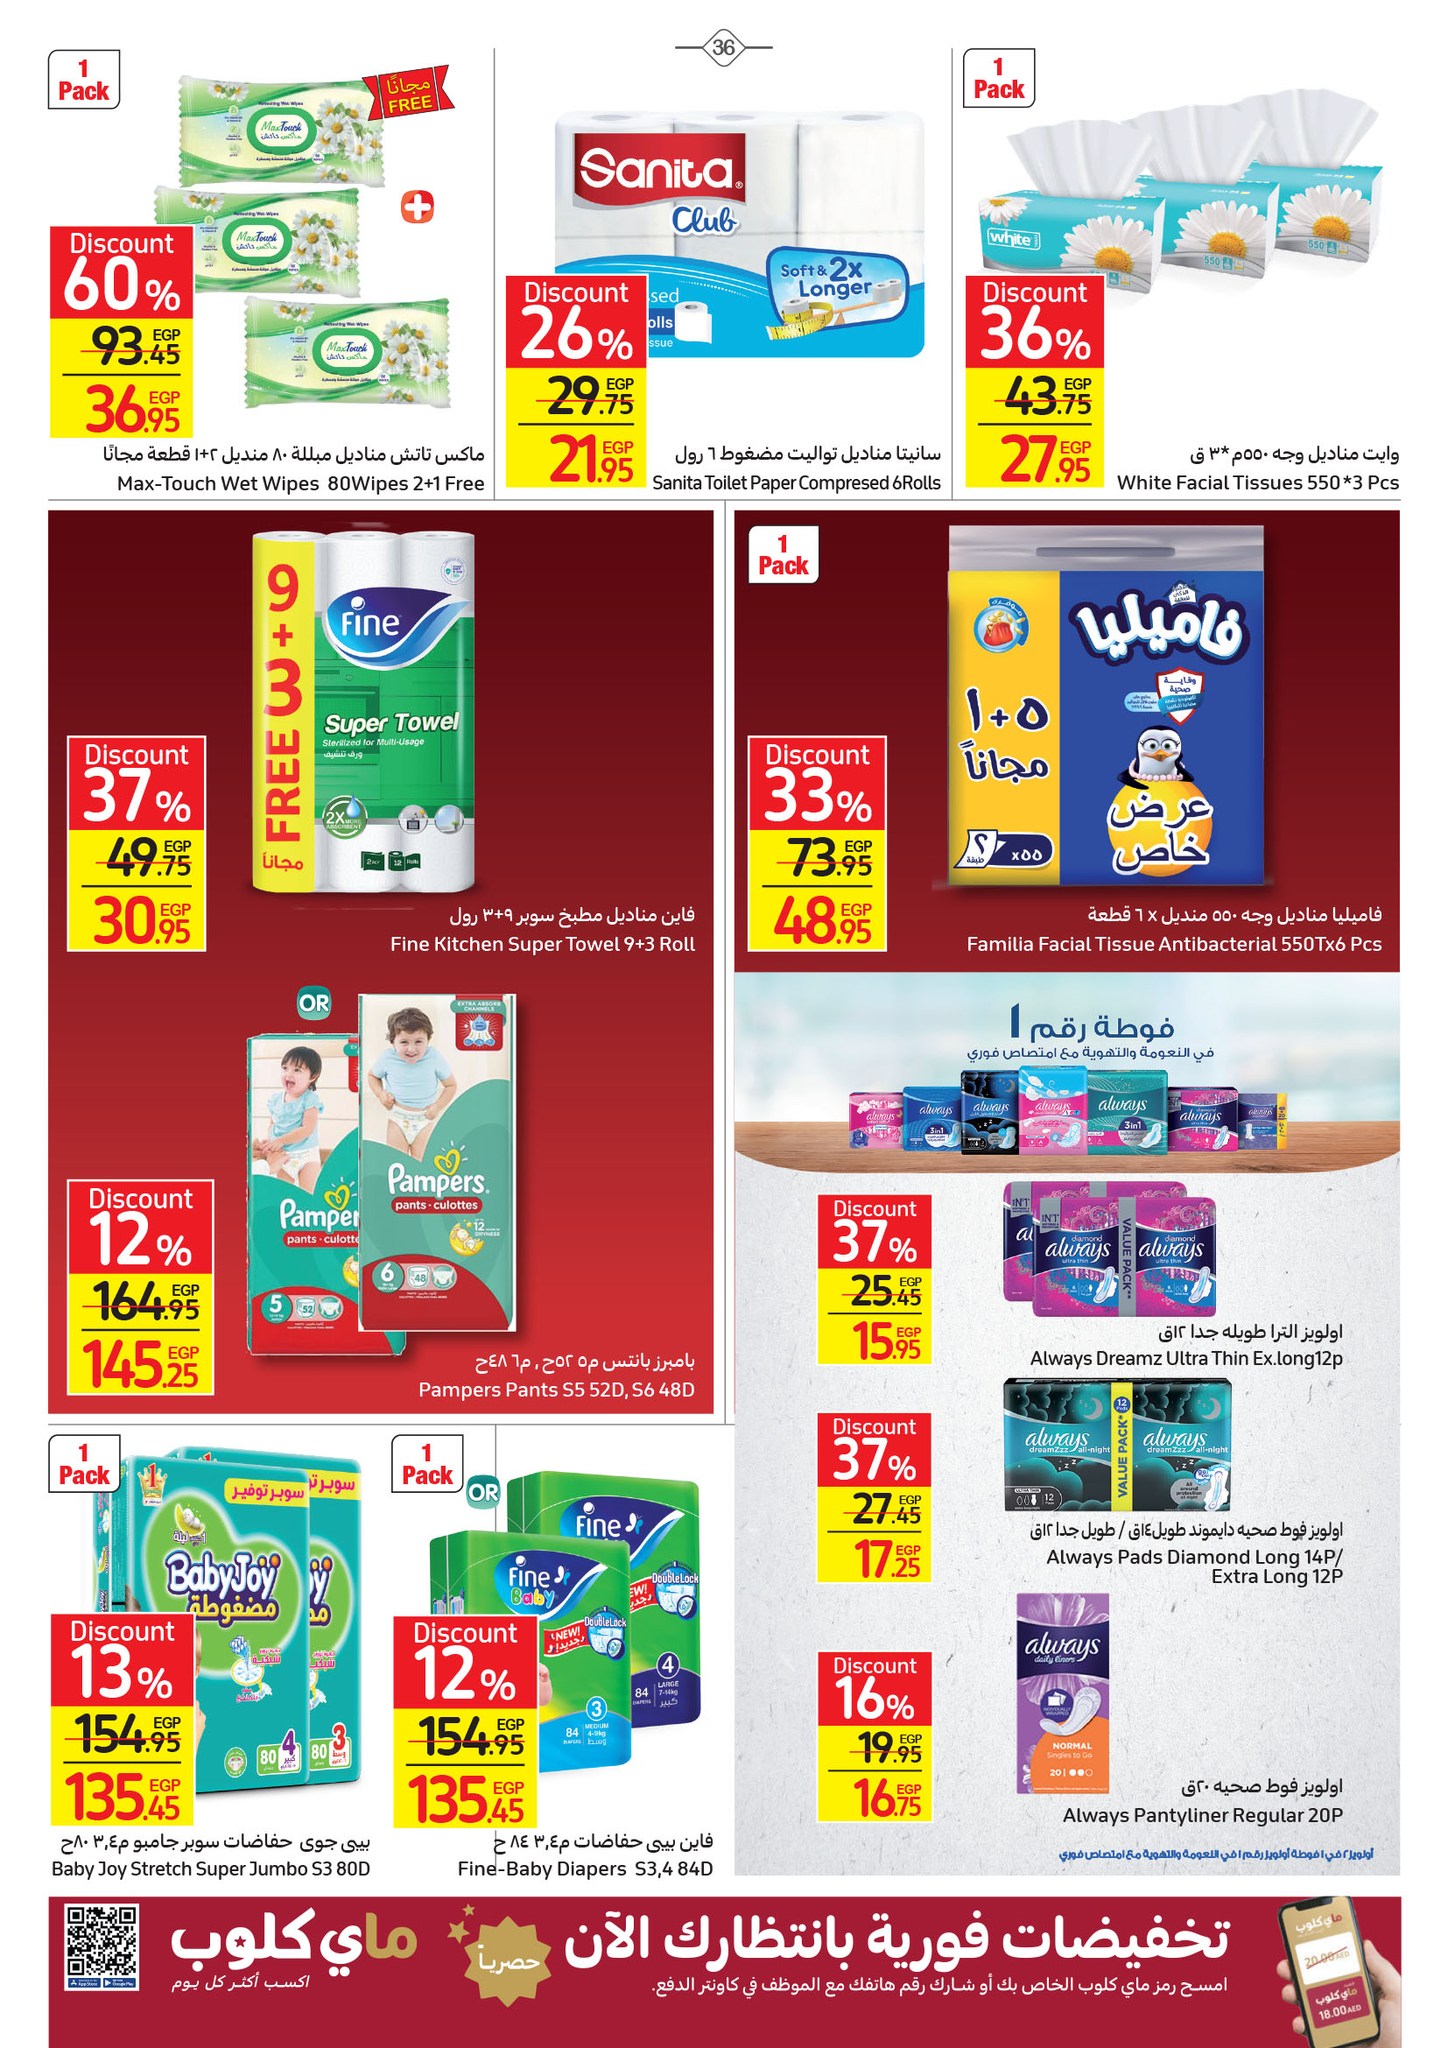 Watch the latest Carrefour half price offers "Last Chance Offer" until December 4th 36